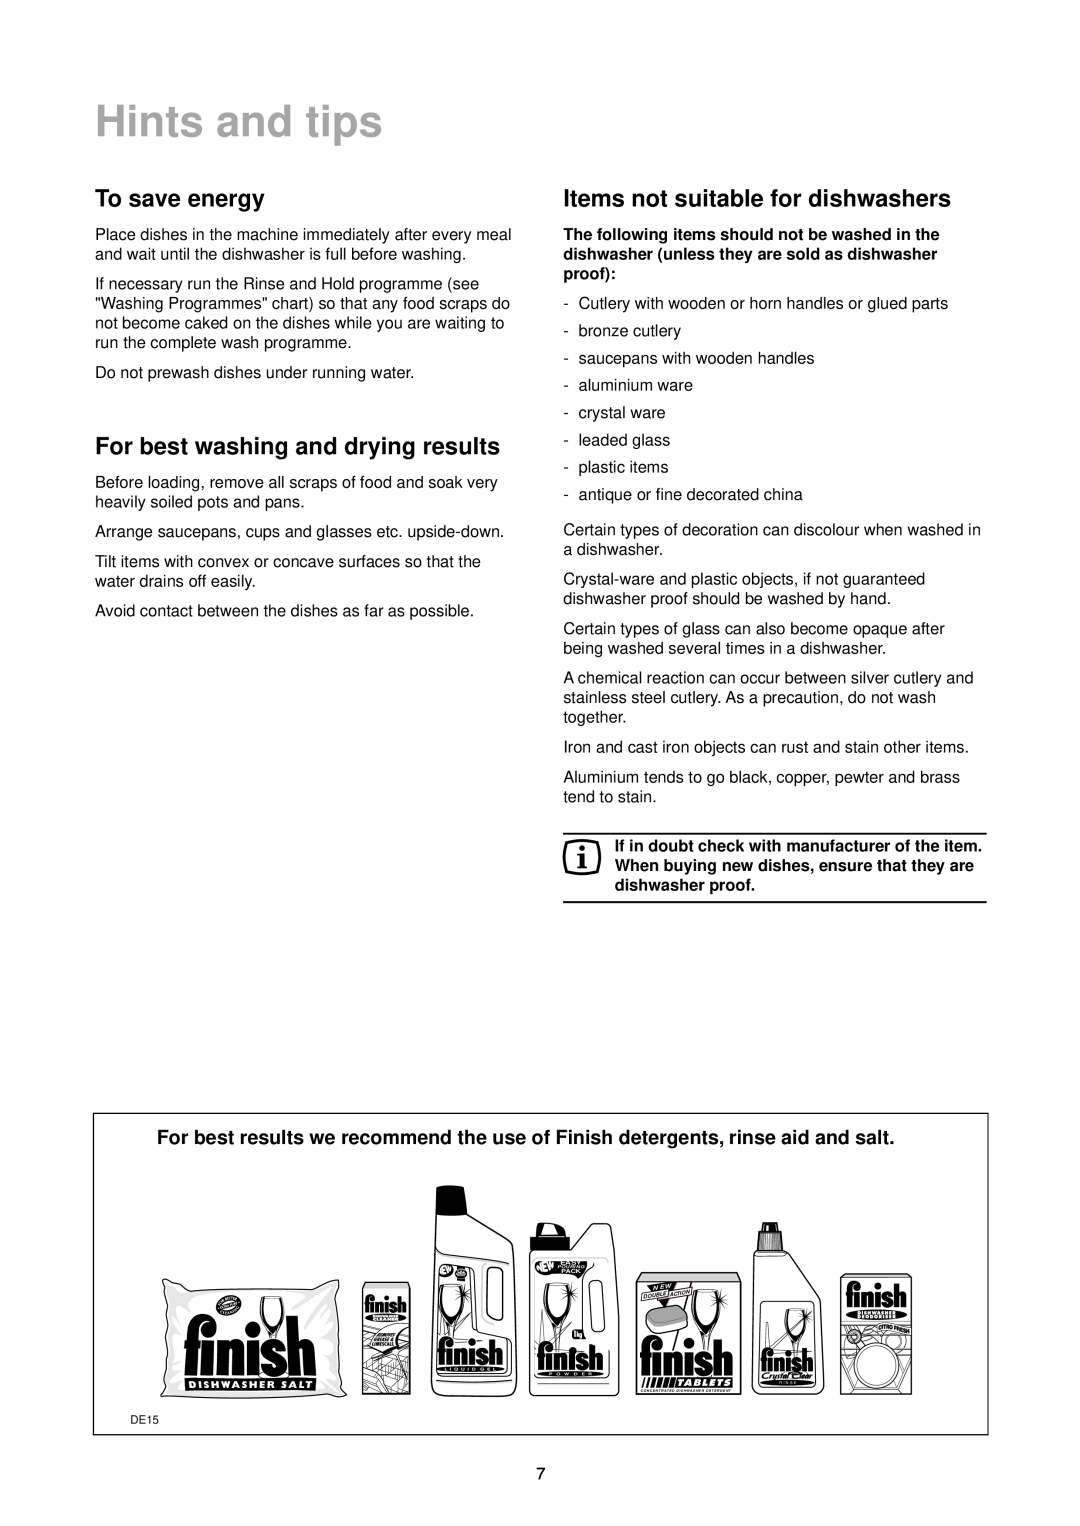 Zanussi DA 4342 Hints and tips, To save energy, For best washing and drying results, Items not suitable for dishwashers 